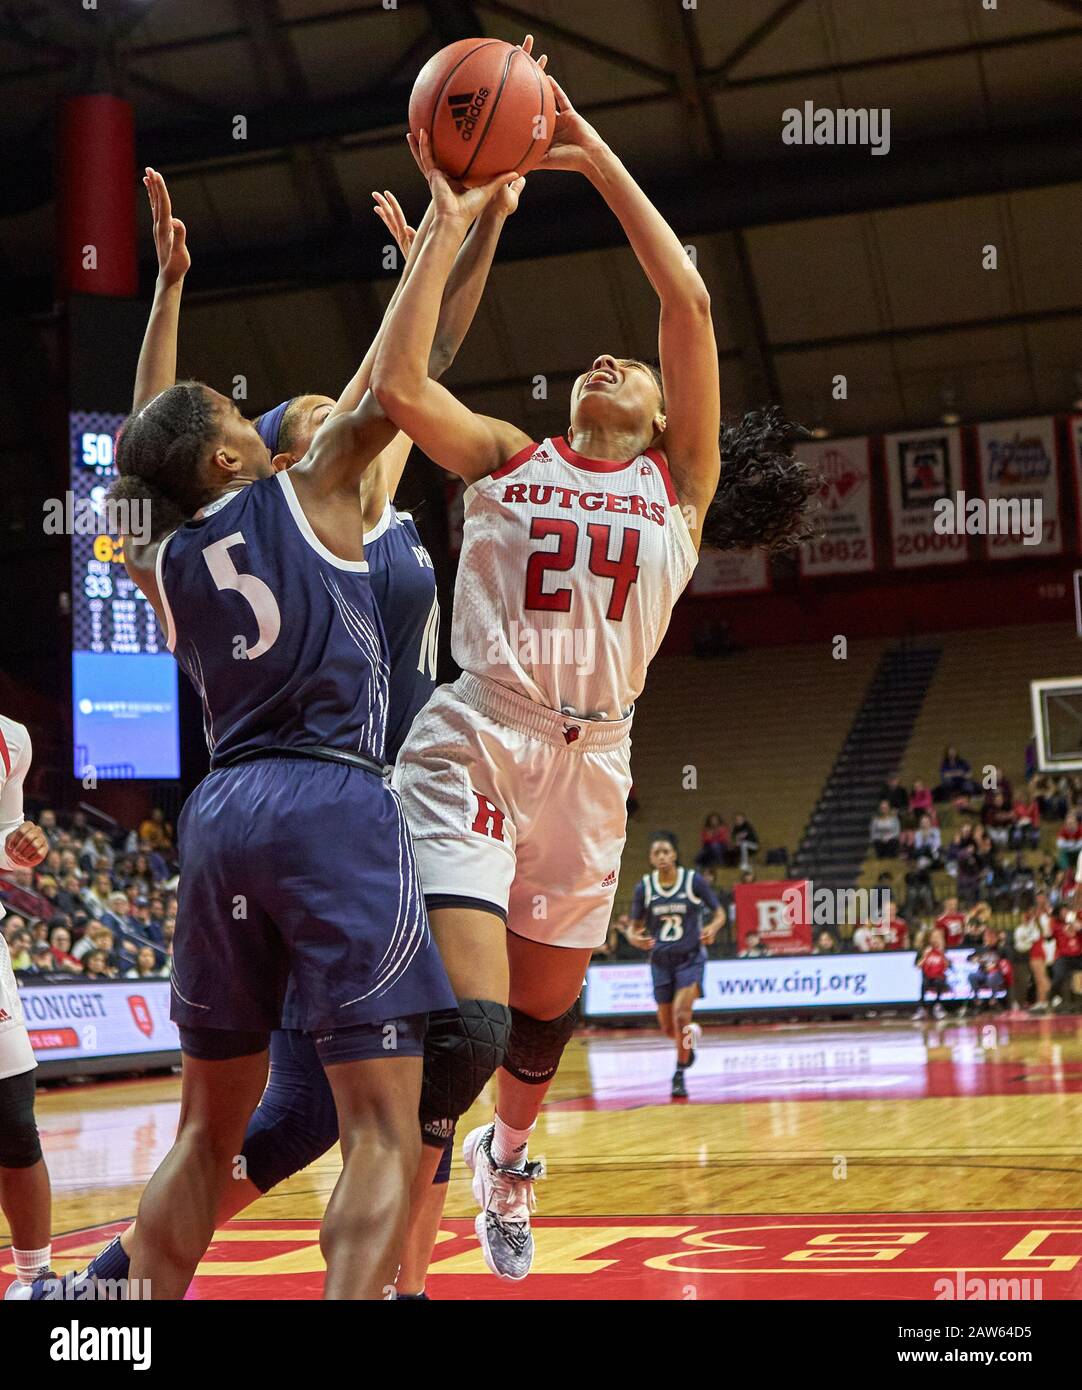 Piscataway, New Jersey, USA. 6th Feb, 2020. Rutgers Scarlet Knights guard Arella Guirantes (24) is fouled byPenn State Nittany Lions guard Kamaria McDaniel (5) in the second half during a game between the Penn State Nittany Lions and the Rutgers Scarlet Knights at Rutgers Athletic Center in Piscataway, New Jersey. Rutgers defeated Penn State 72-39. Duncan Williams/CSM/Alamy Live News Stock Photo